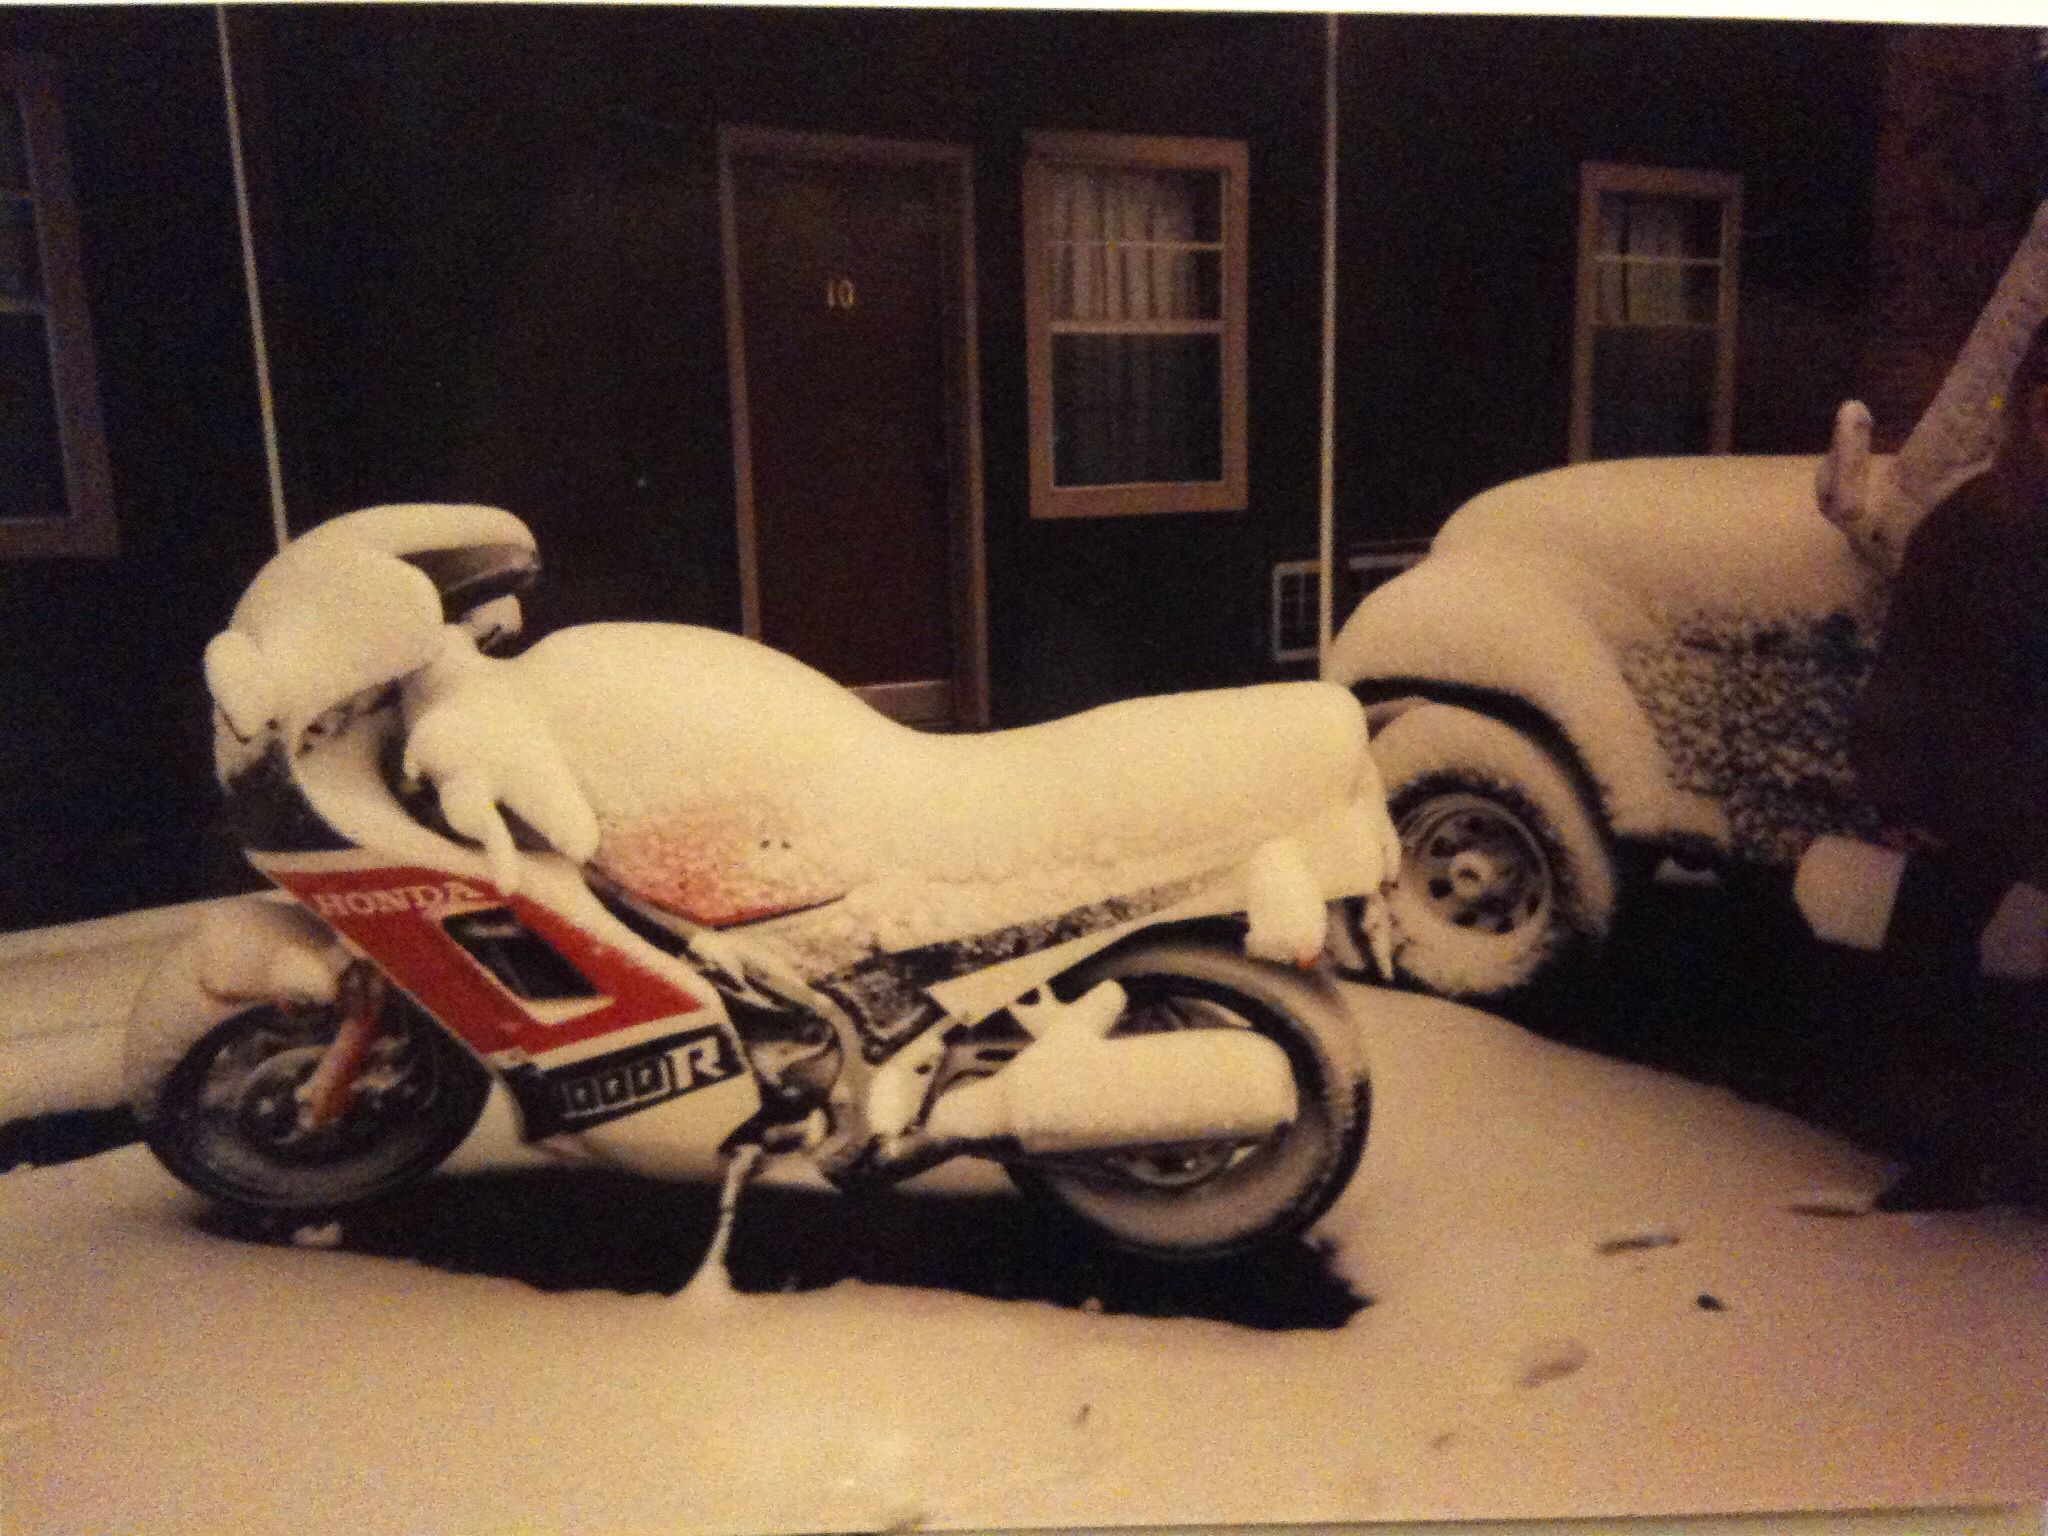 1993 - Troy, AL (Home) - My '84 Honda Interceptor VF1000R and my Jeep in the background during the (although small) biggest snow storm of my young lif